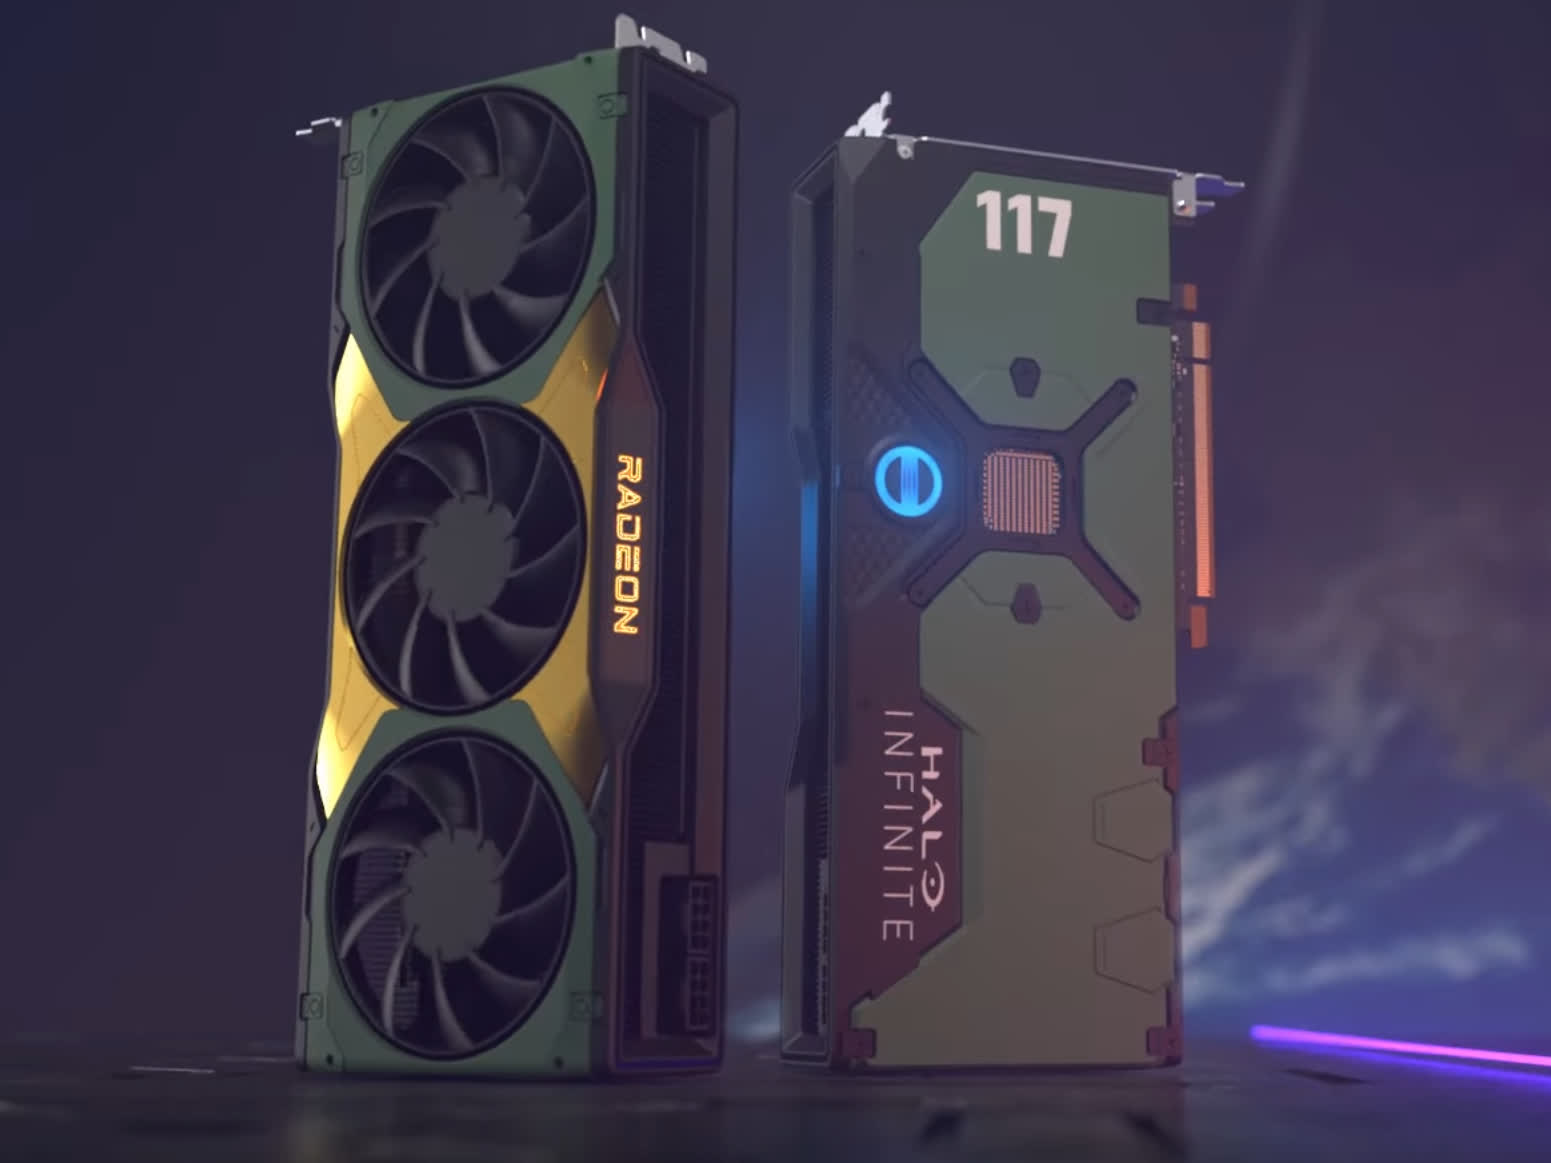 AMD is giving you the chance to win a Radeon RX 6900 XT Halo Infinite card